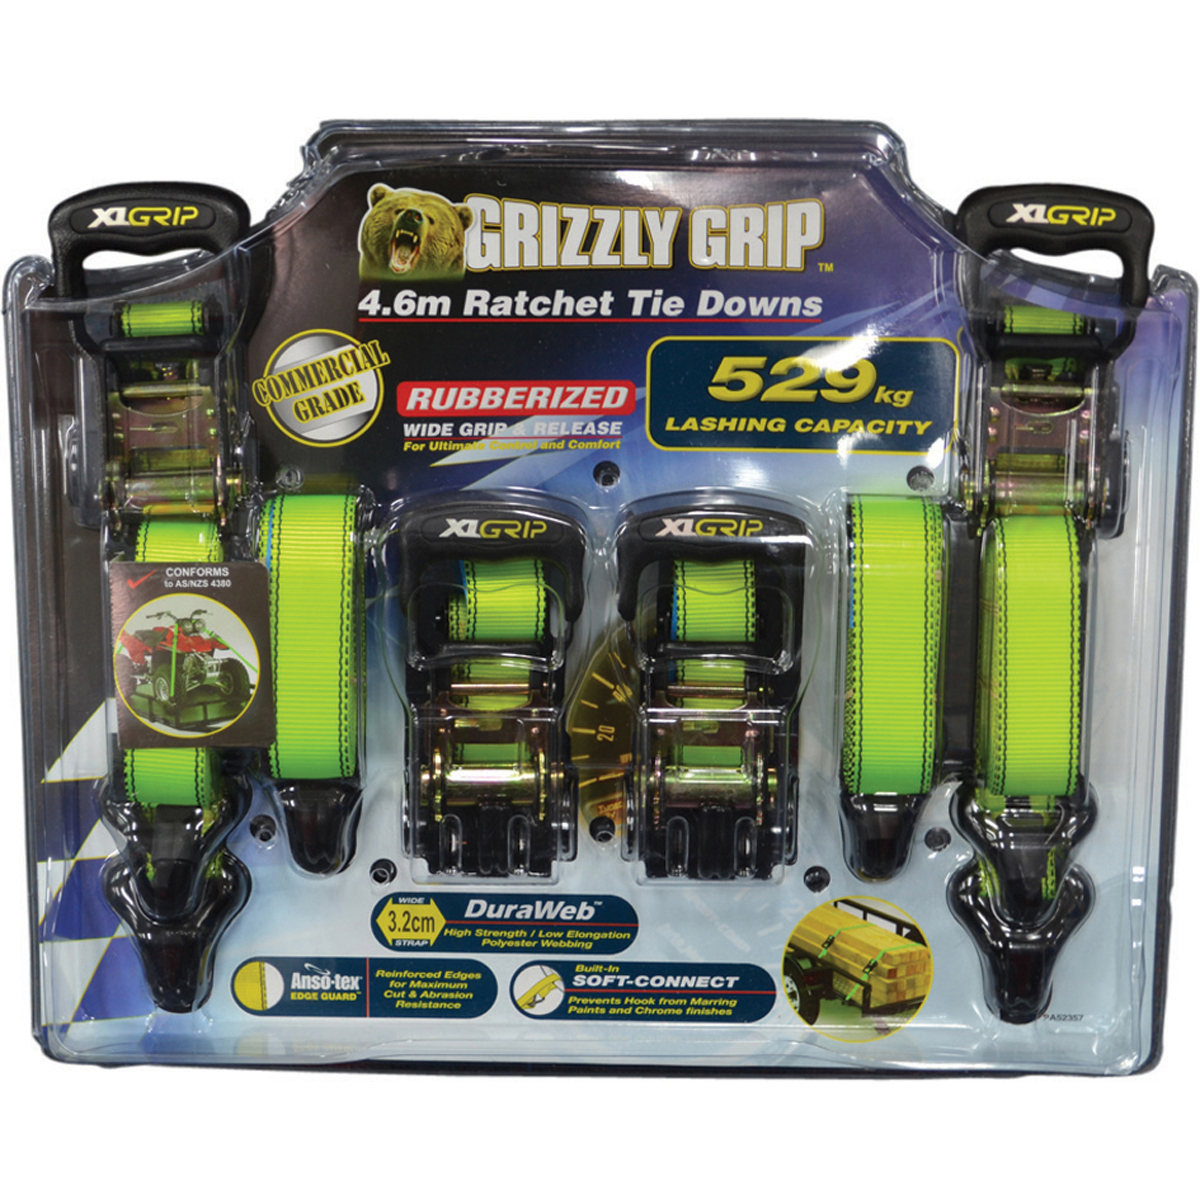 Grizzly Grip Ratchet Tie Down - 4.6m, 529kg, 4 Pack